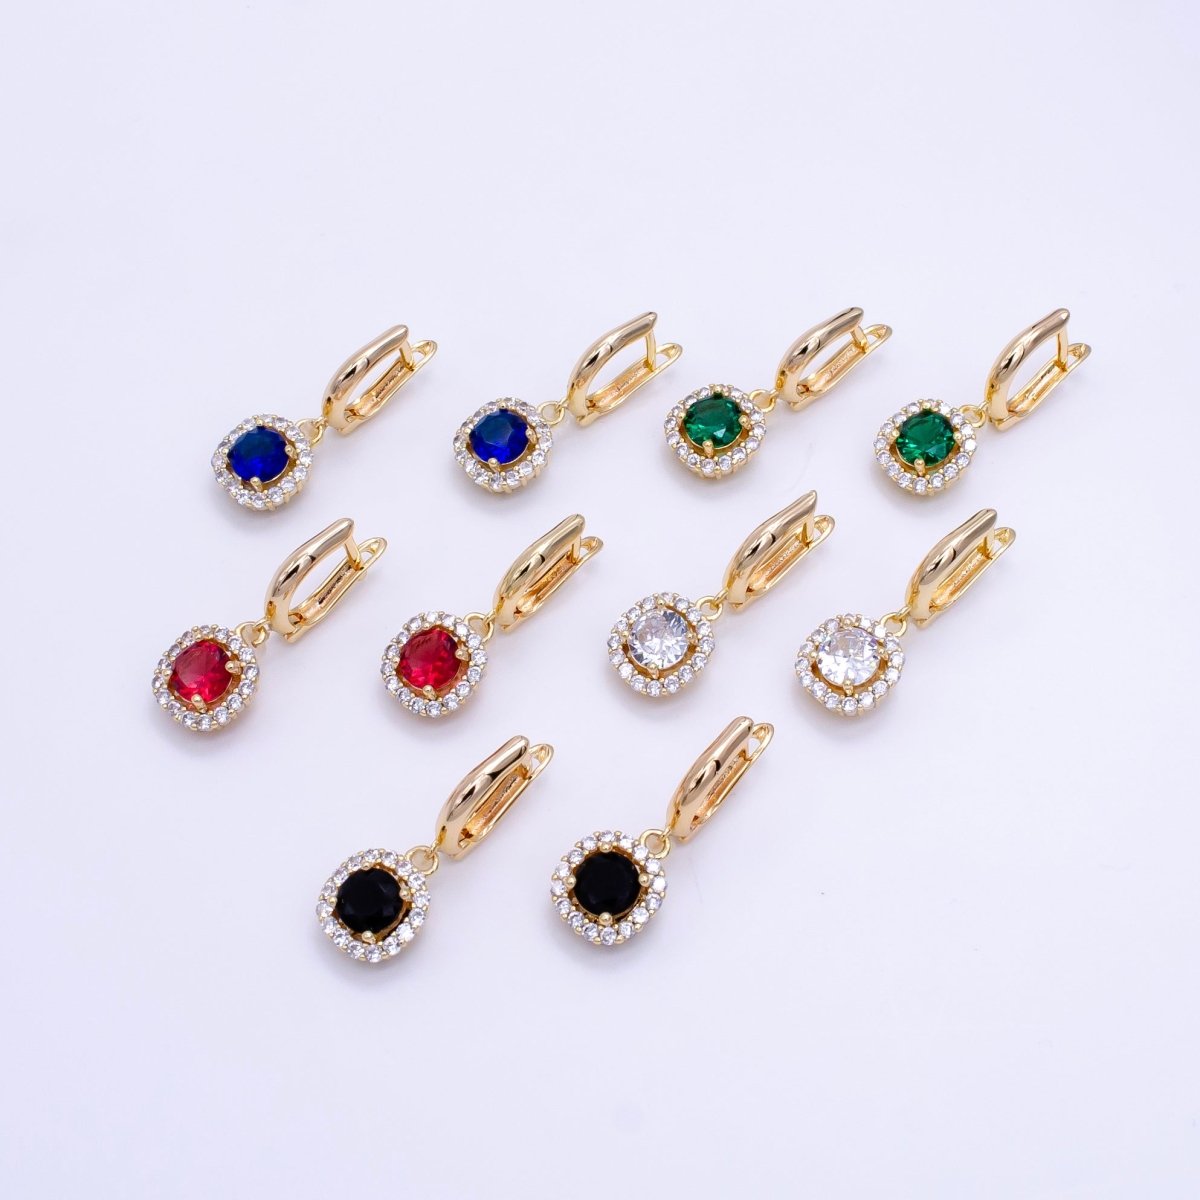 16K Gold Filled Clear, Black, Red, Blue, Green CZ Micro Paved Square Drop English Lock Earrings | AB1156 - AB1158 - DLUXCA